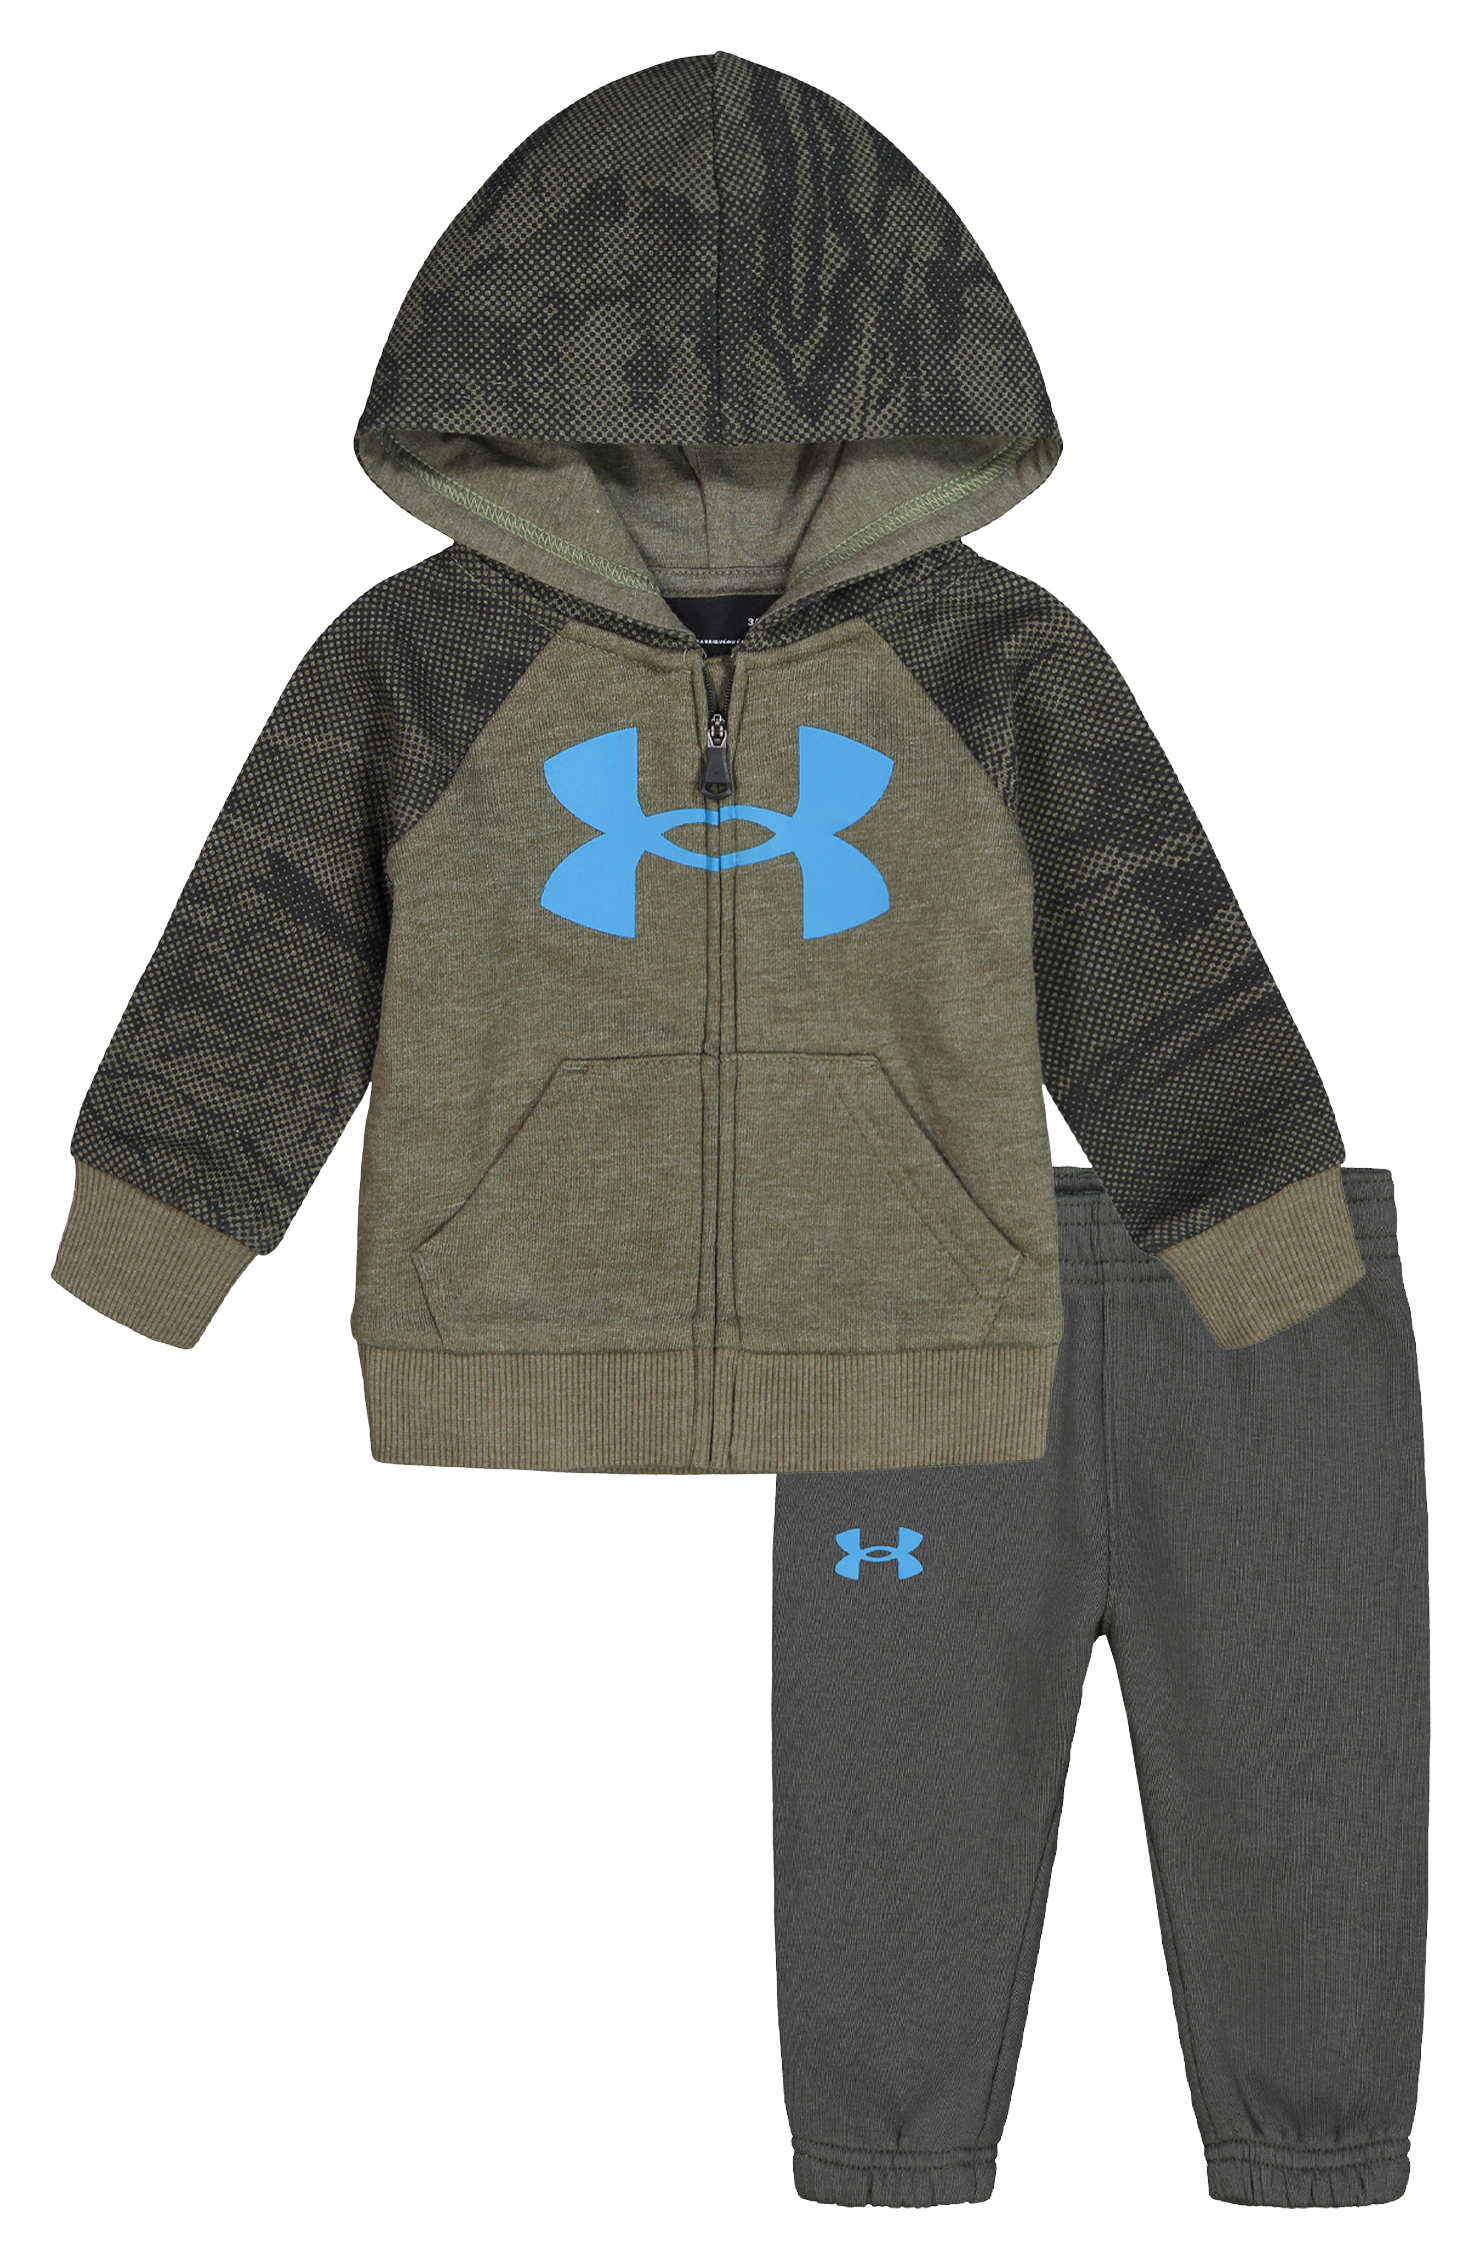 Under Amour Half Tone Reaper Colorblock Long Sleeve Hoodie and Jogger Set for Babies Marine OD Green 0 3 Months